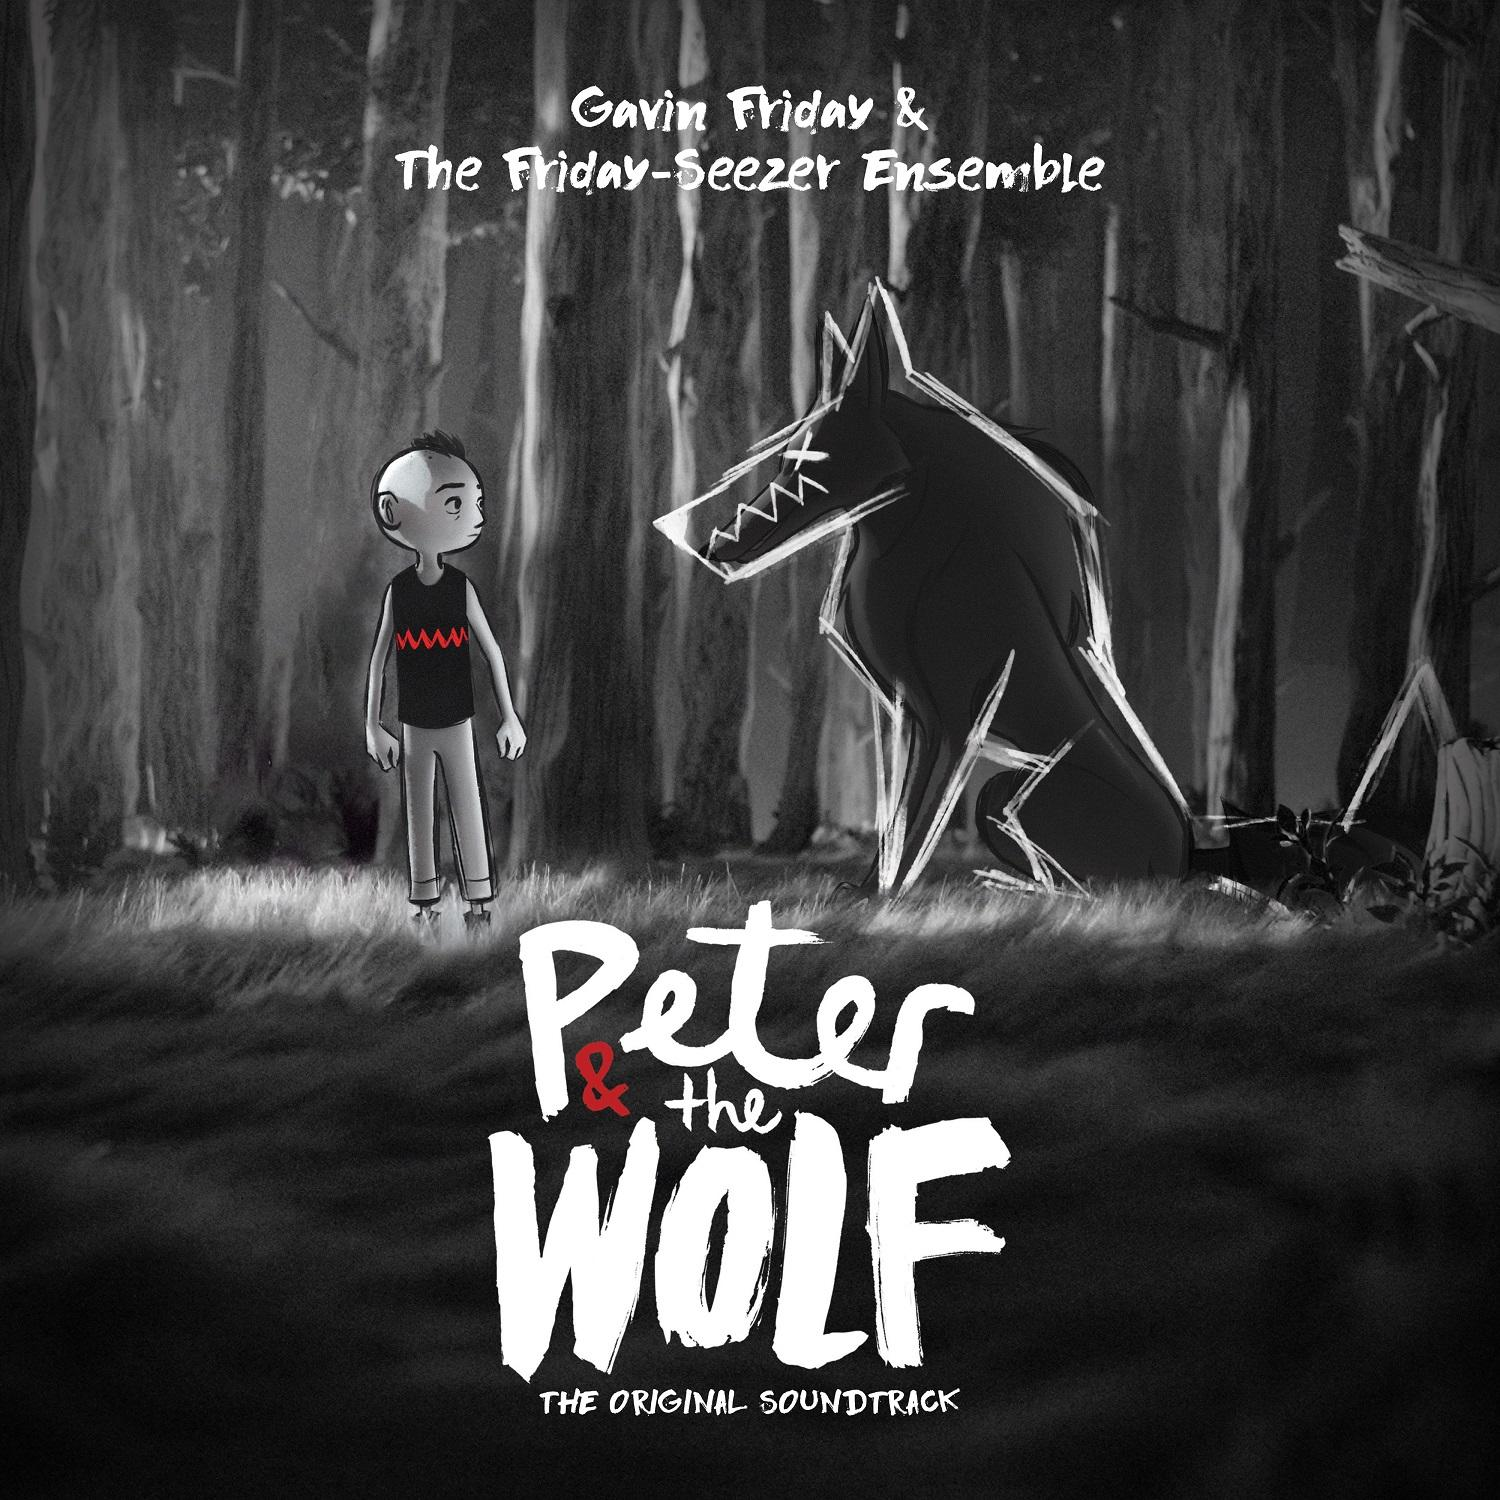 Friday-Seezer Peter the (CD) - and Ensemble Wolf - The